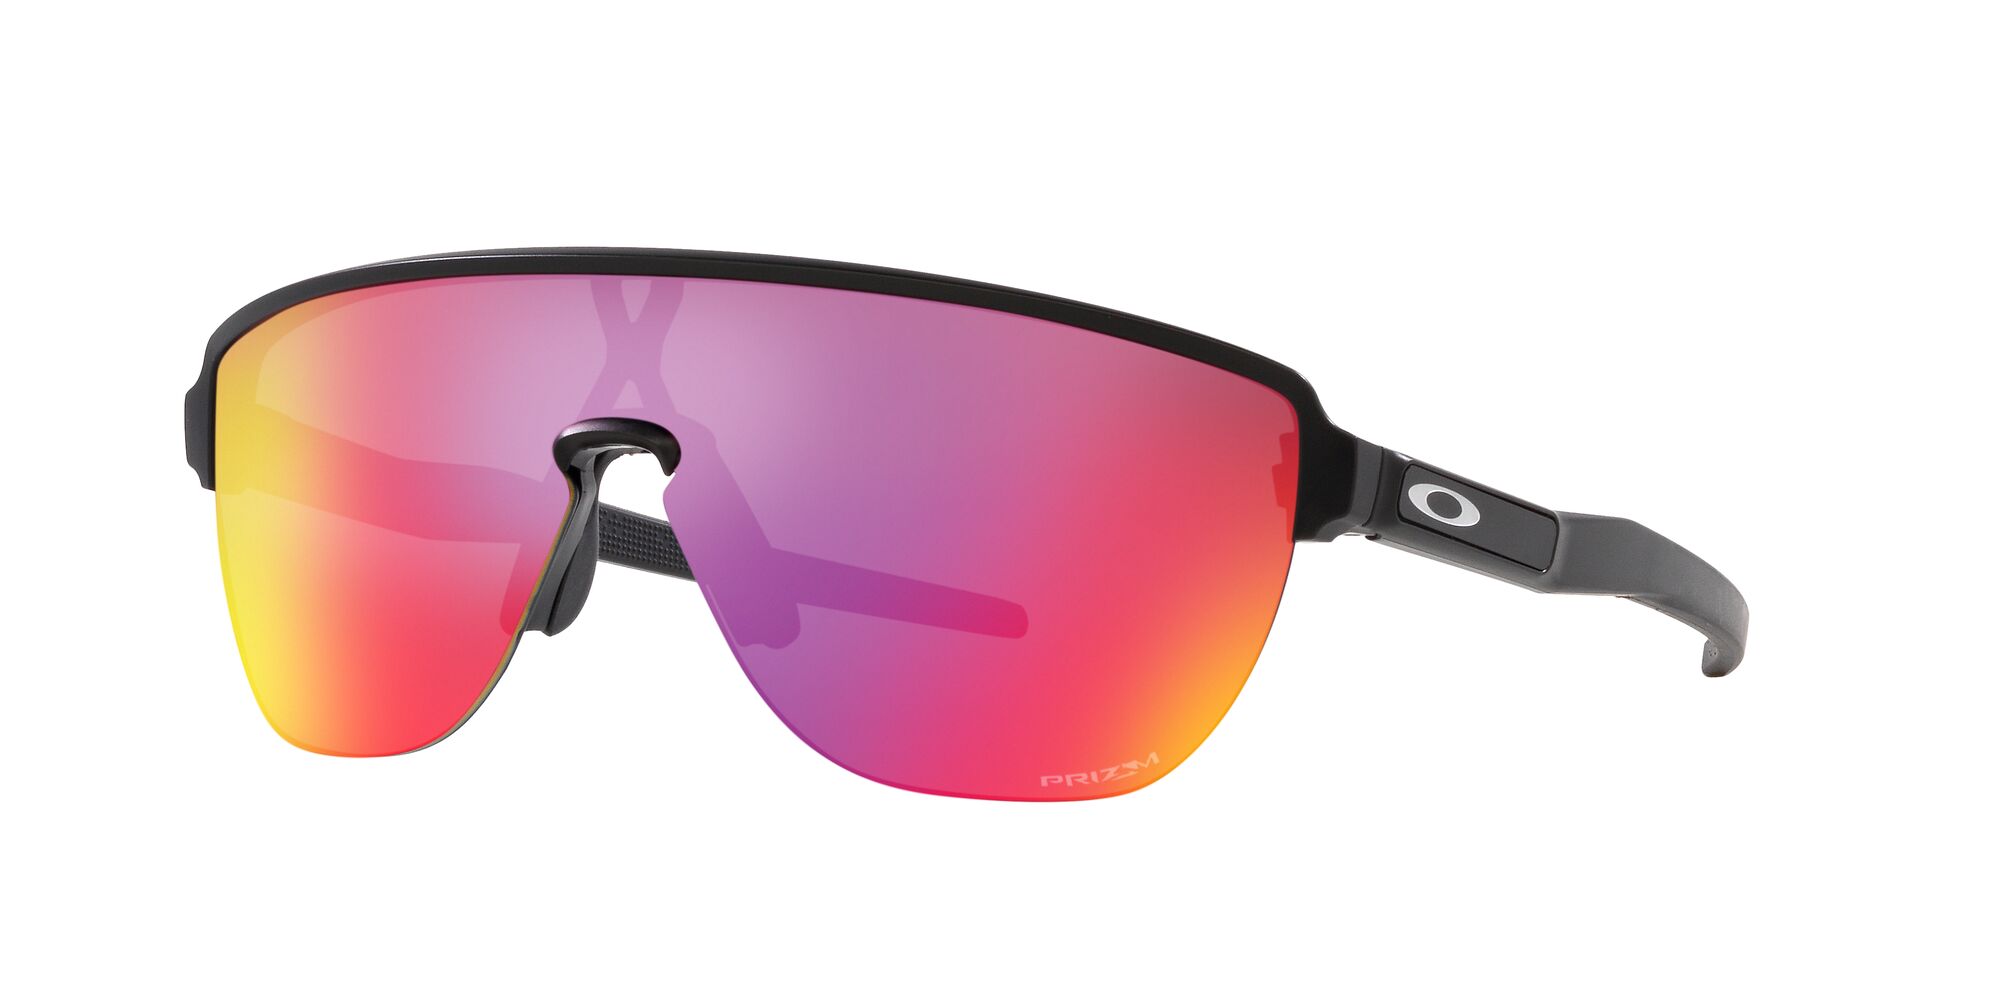 Sunglass Hut® South Africa Online Store | Products | Oakley